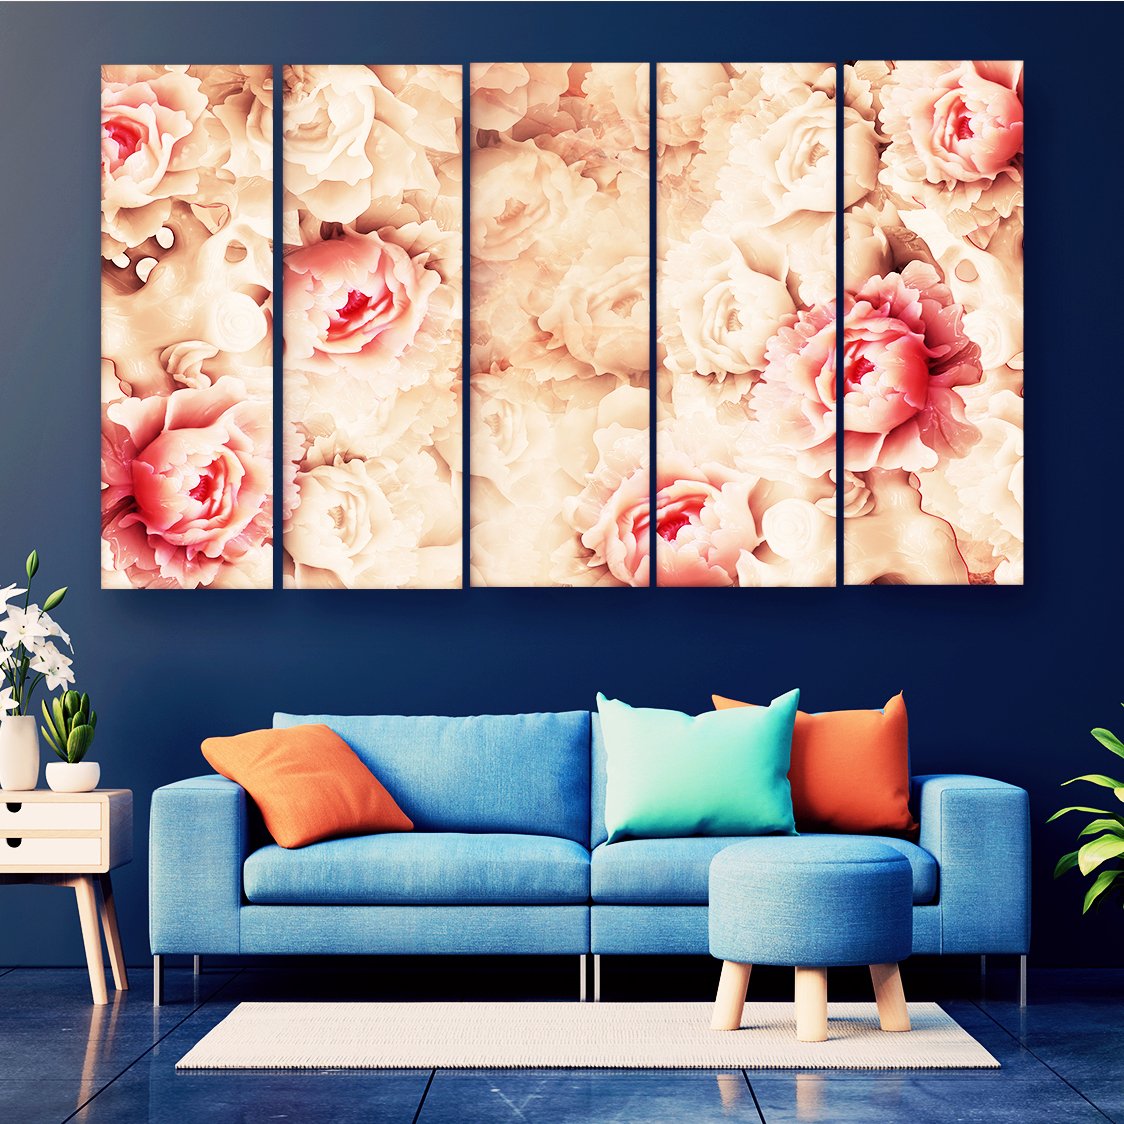 Casperme Abstract Modern Art Wall Painting For Living Room for Bedroom, Hotels & Office Decoration (48×30 inhes)